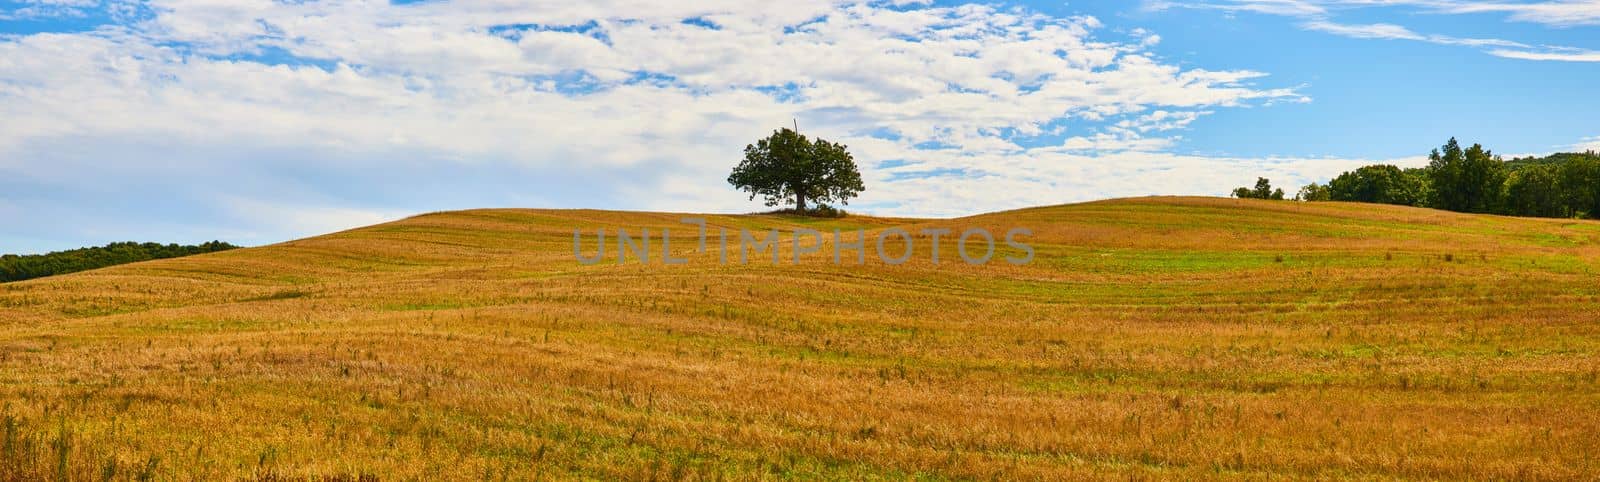 Panoramic view of golden fields in country hills with lone green tree in center frame and blue sky by njproductions